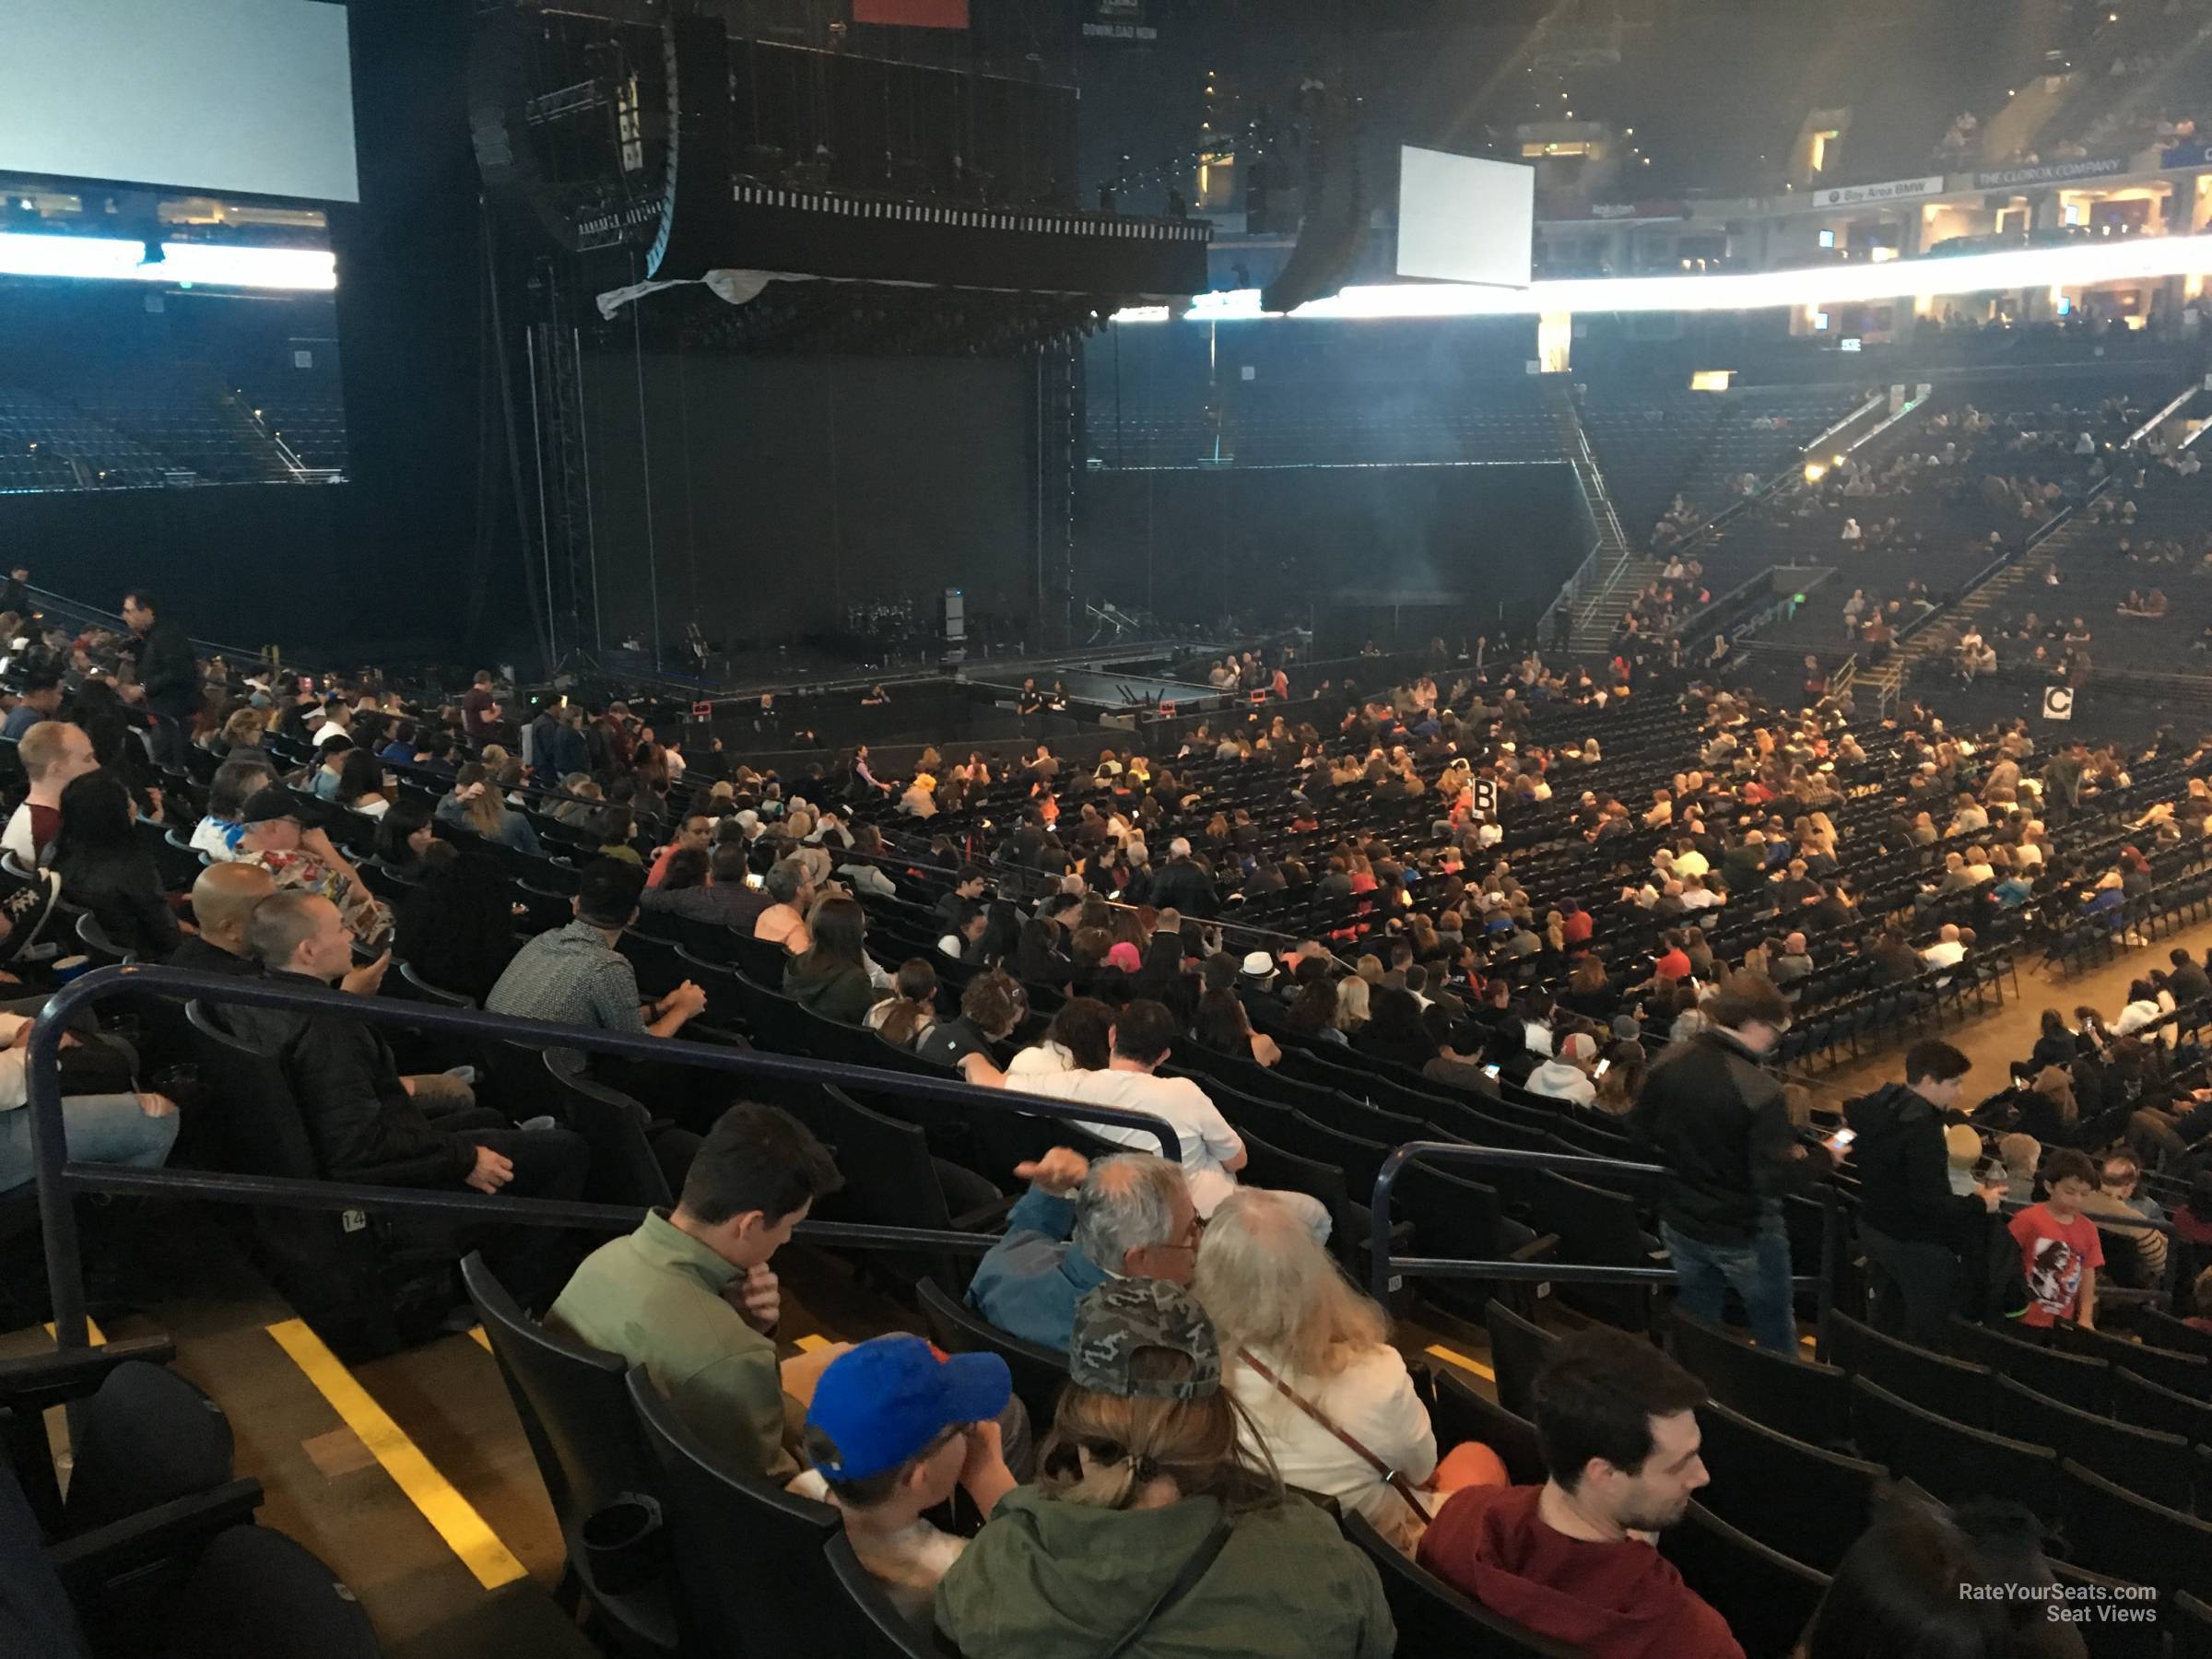 section 113, row 16 seat view  - oakland arena